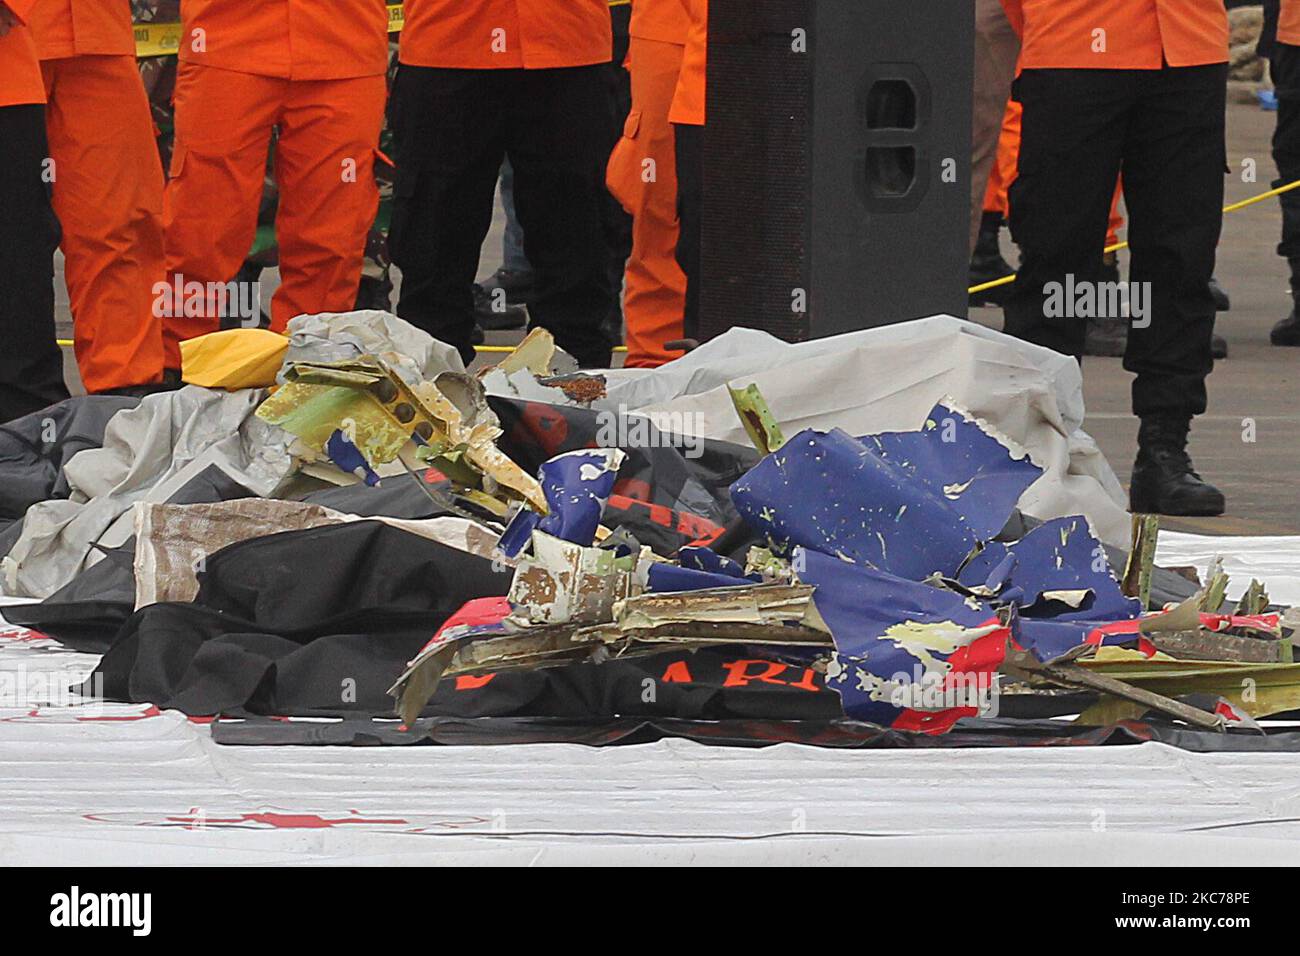 Sriwijaya Air plane's debris was collected at the evacuation center located at Port of Tanjung Priok on January 10, 2021. The plane with 62 passengers with flight number SJ 182, which was scheduled to fly from Jakarta to Pontianak, crashed into the sea located in the north of Jakarta shortly after takeoff from Soekarno-Hatta airport on Saturday, January 9, 2021 (Photo by Eddy Purwanto/NurPhoto) Stock Photo